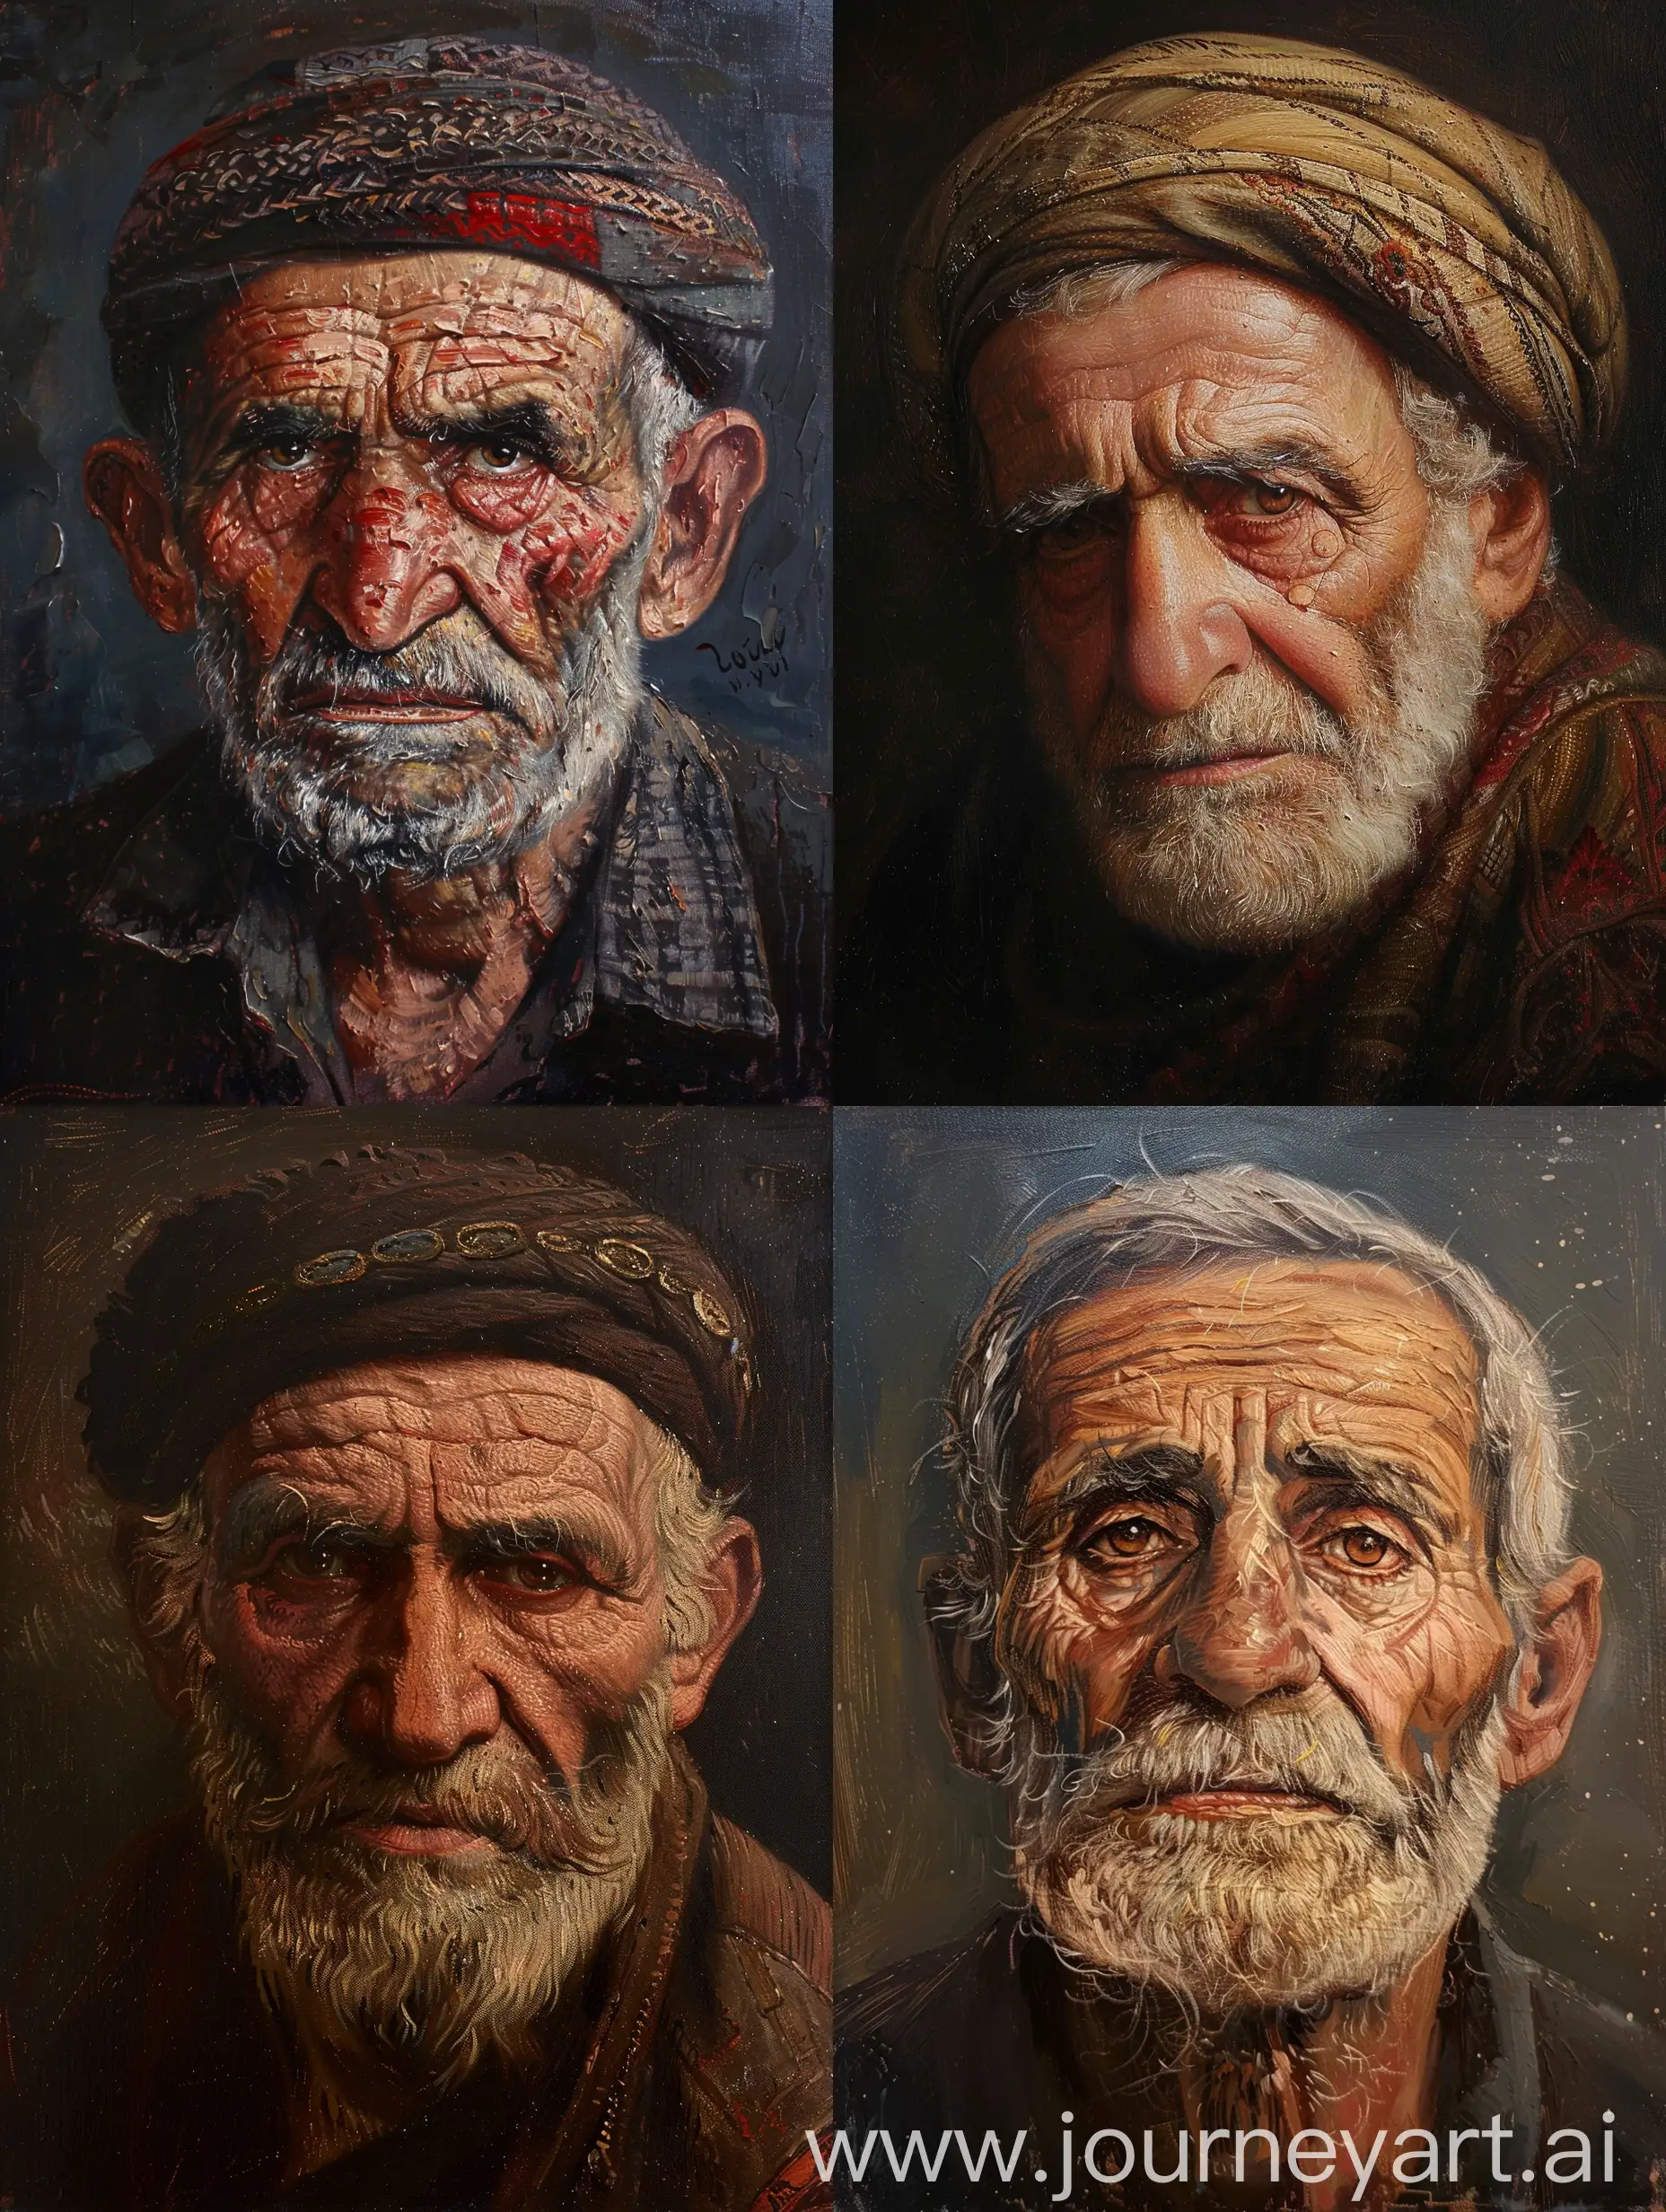 An old anatolian Greek man, veteran of the ottoman army. His eyes give off the sense that he has seen a lot of horrible things, but he still looks sturdy, strong and proud. Ottoman period. Islamic Renaissance style, Leonardo Davinci style, very detailed, oil painting.